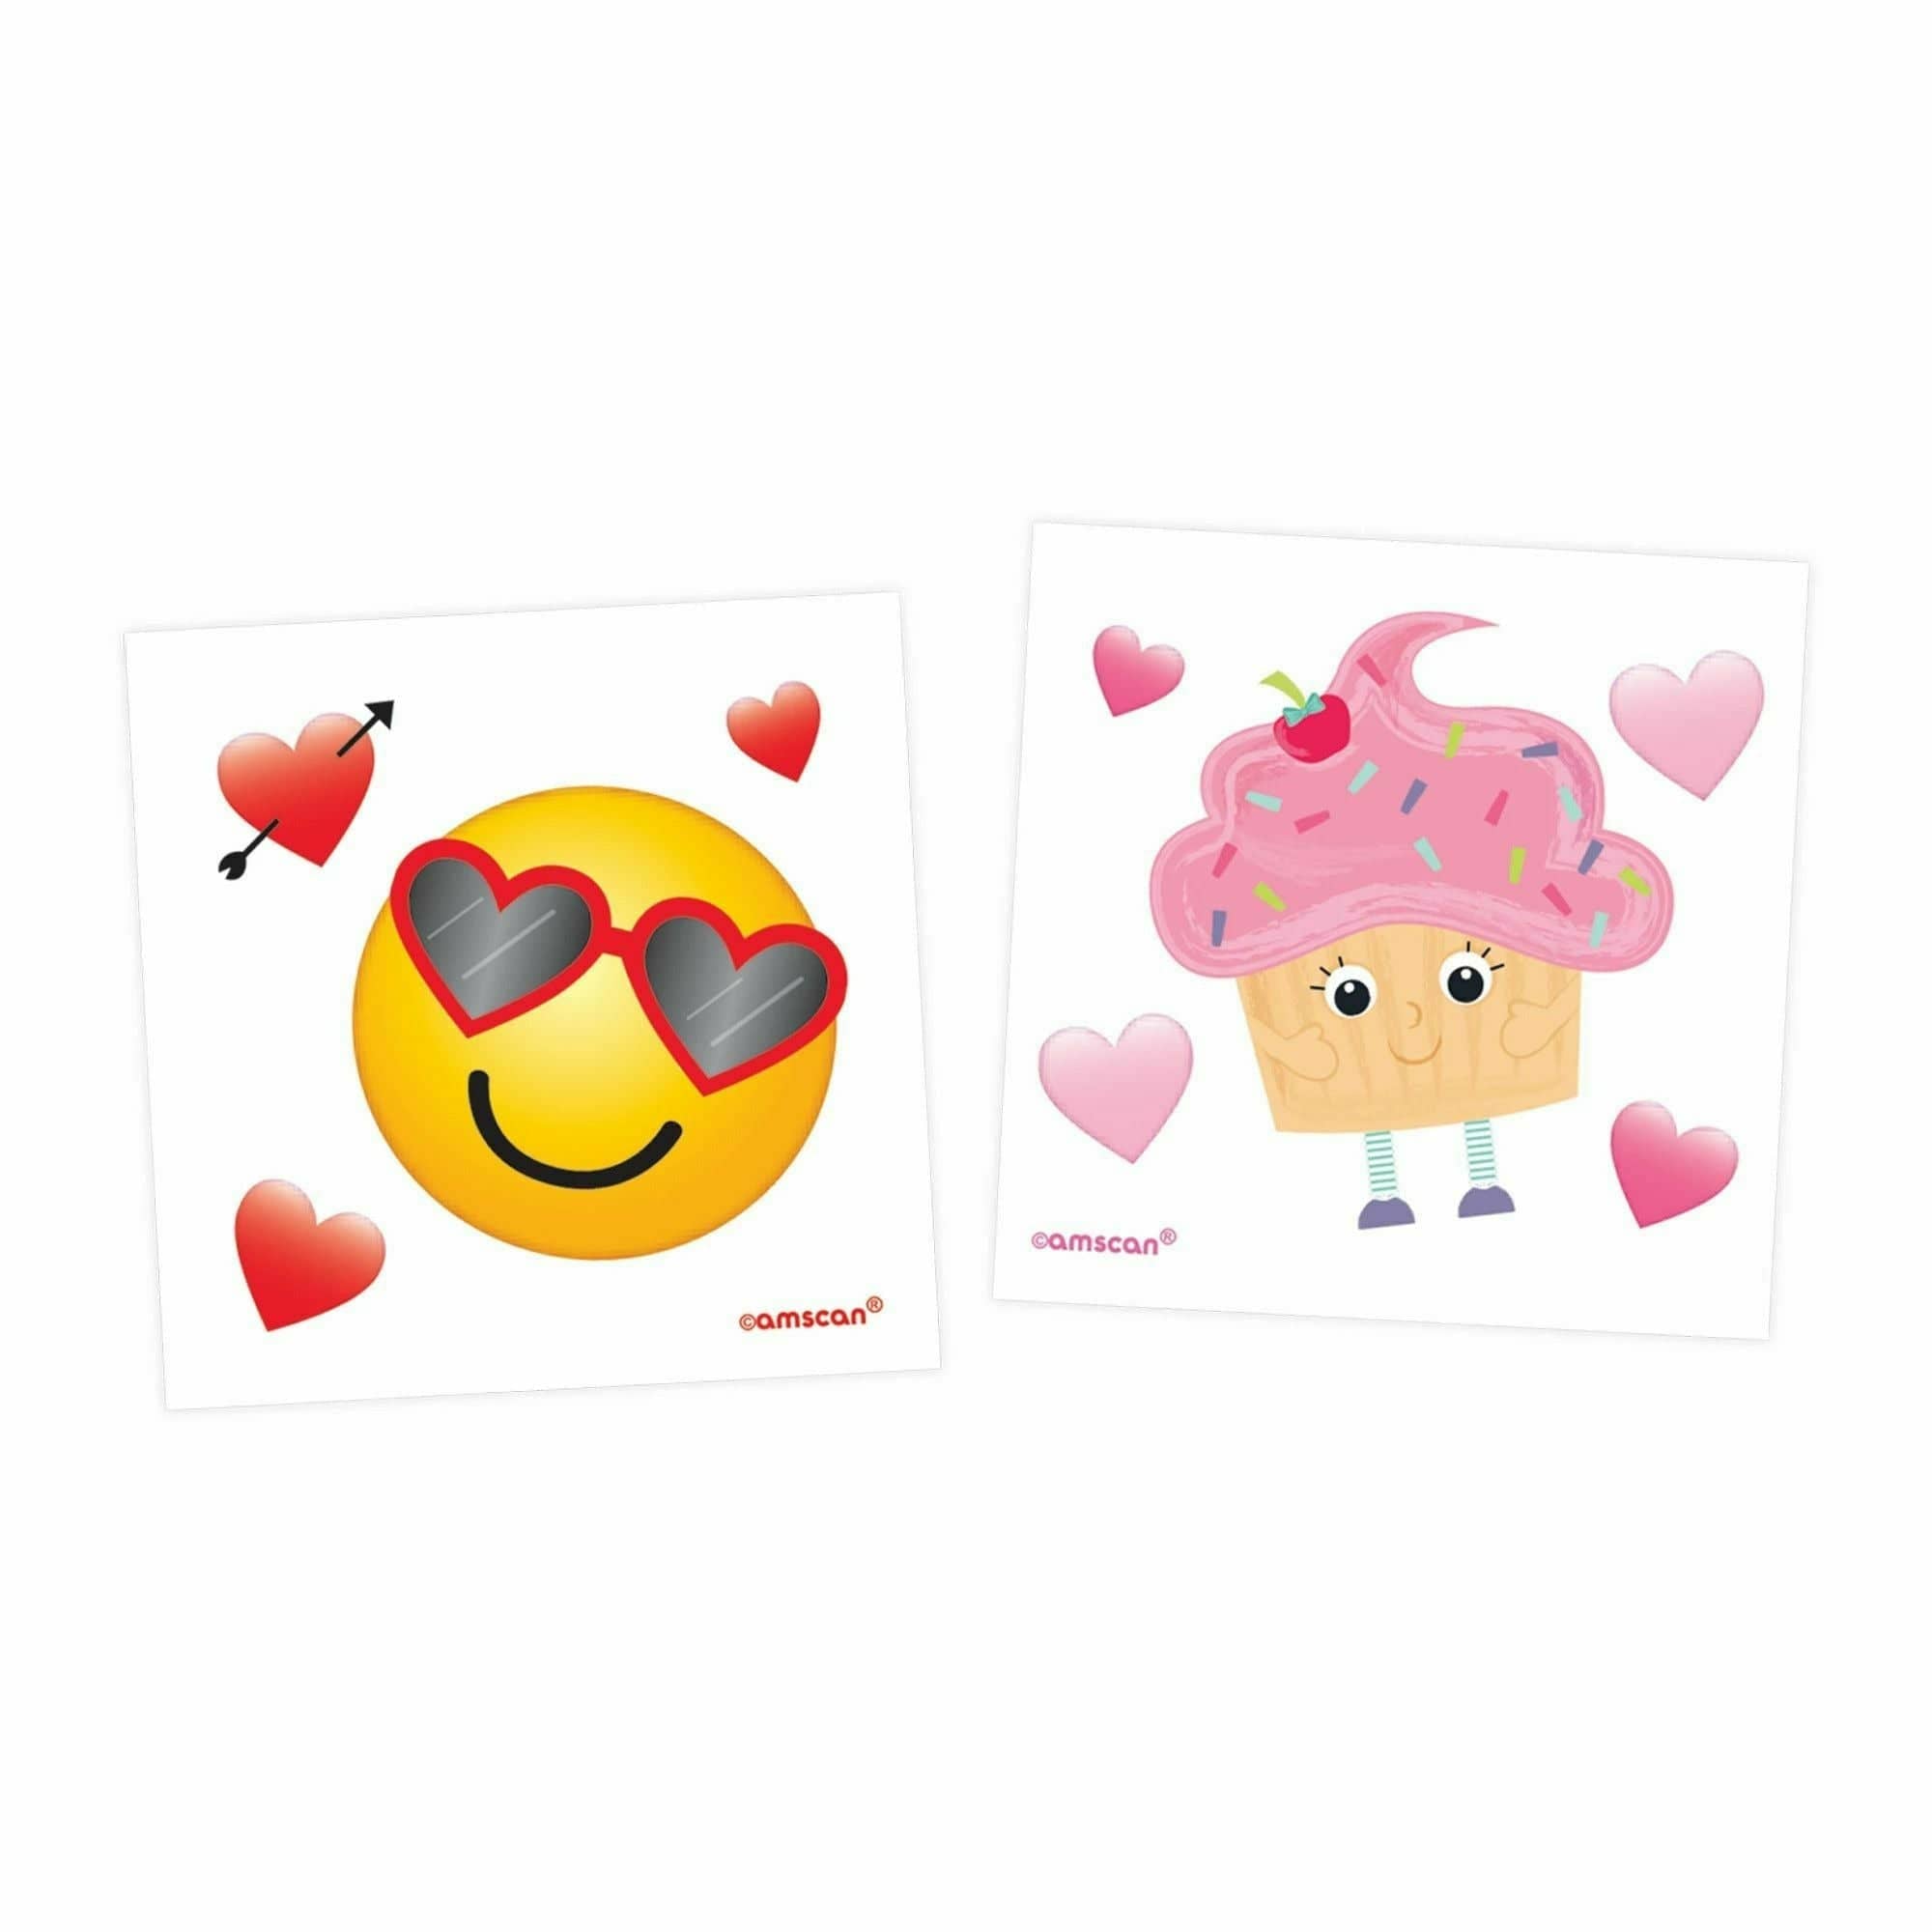 Amscan HOLIDAY: VALENTINES Valentine Characters Tattoos